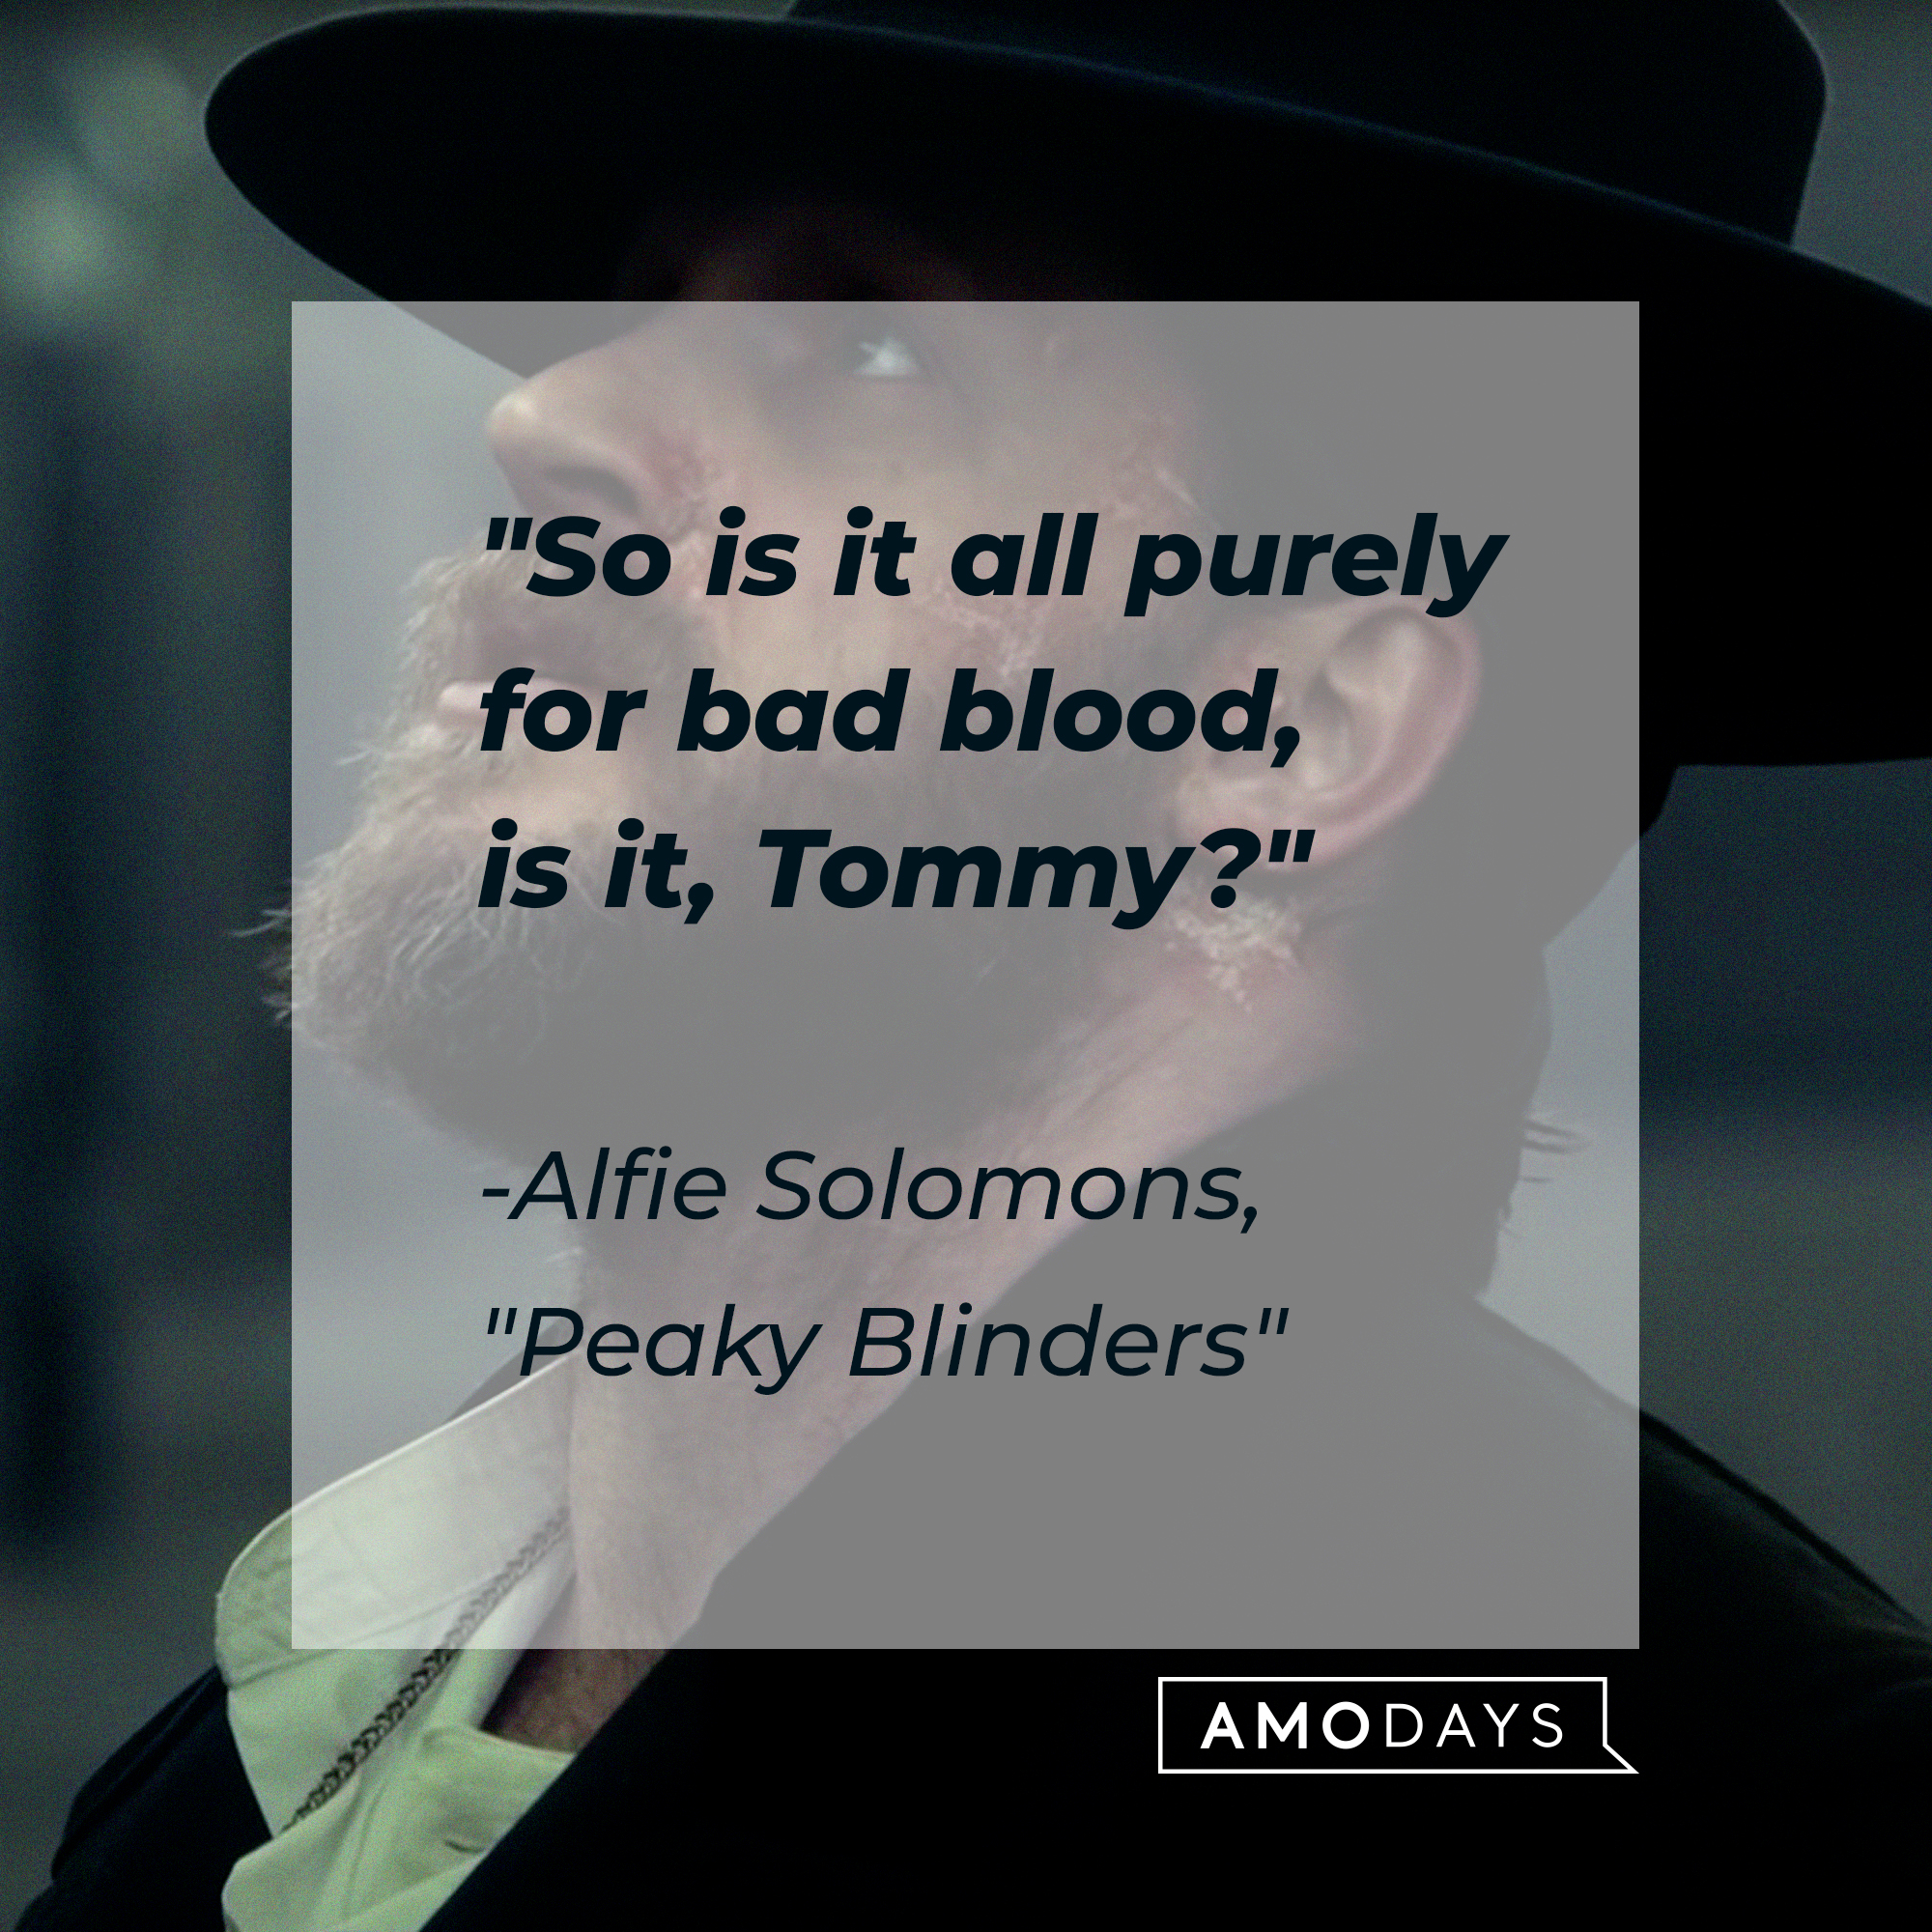 Alfie Solomons’s quote: "So is it all purely for bad blood, is it, Tommy?" | facebook.com/PeakyBlinders: AmoDays